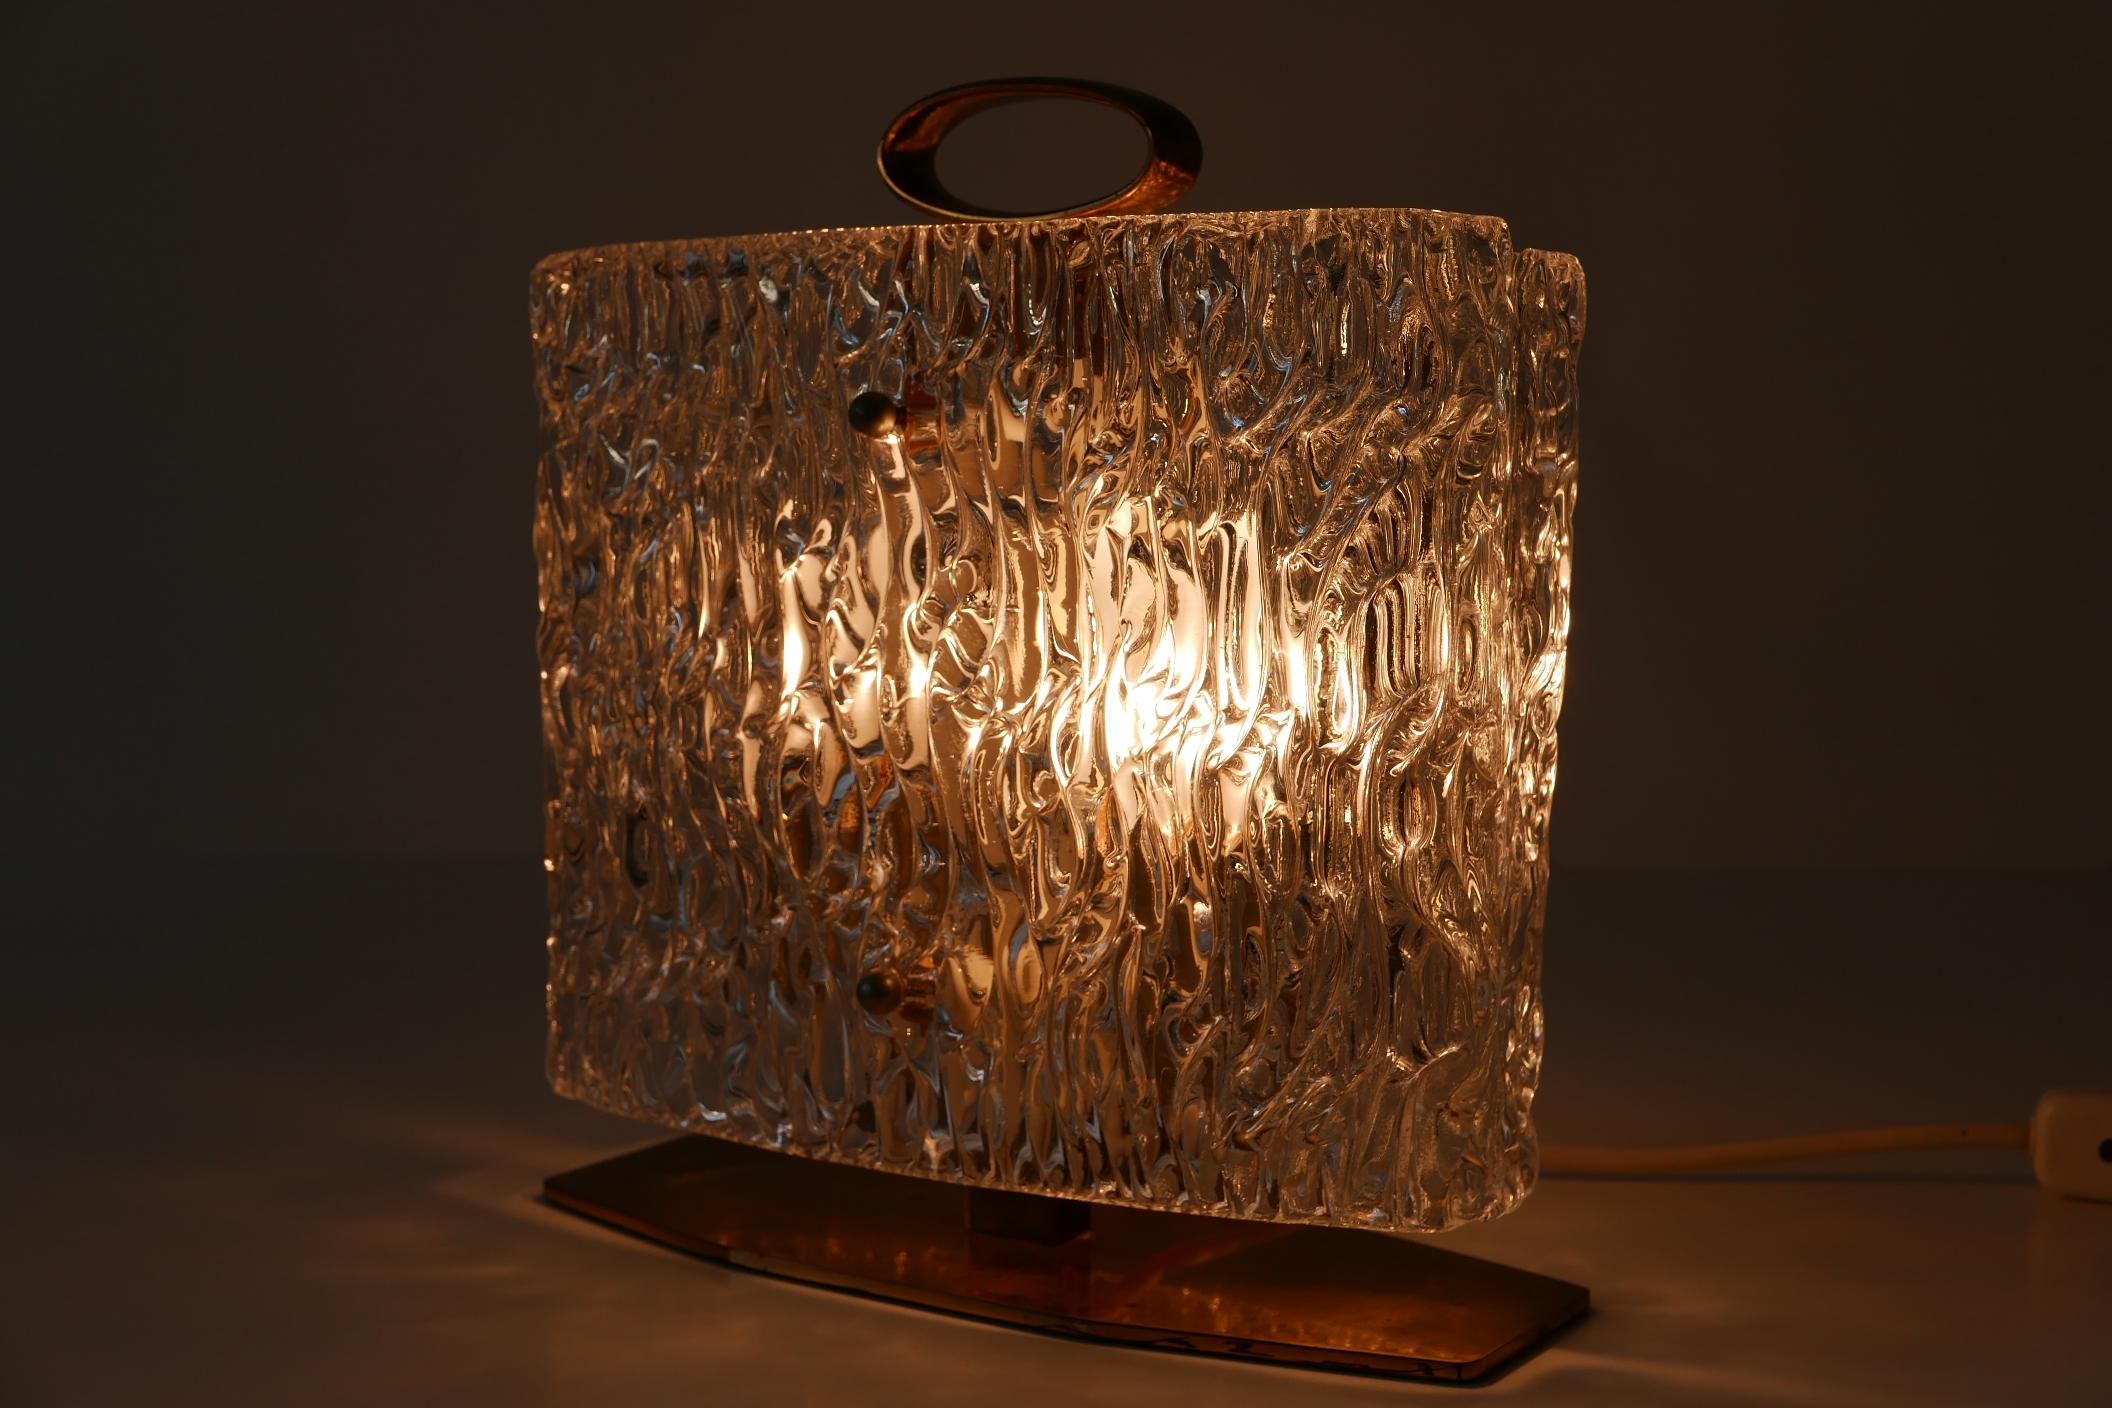 Exceptional Mid-Century Modern Table Lamp with Ice Glass Shade, 1950s, Italy For Sale 2